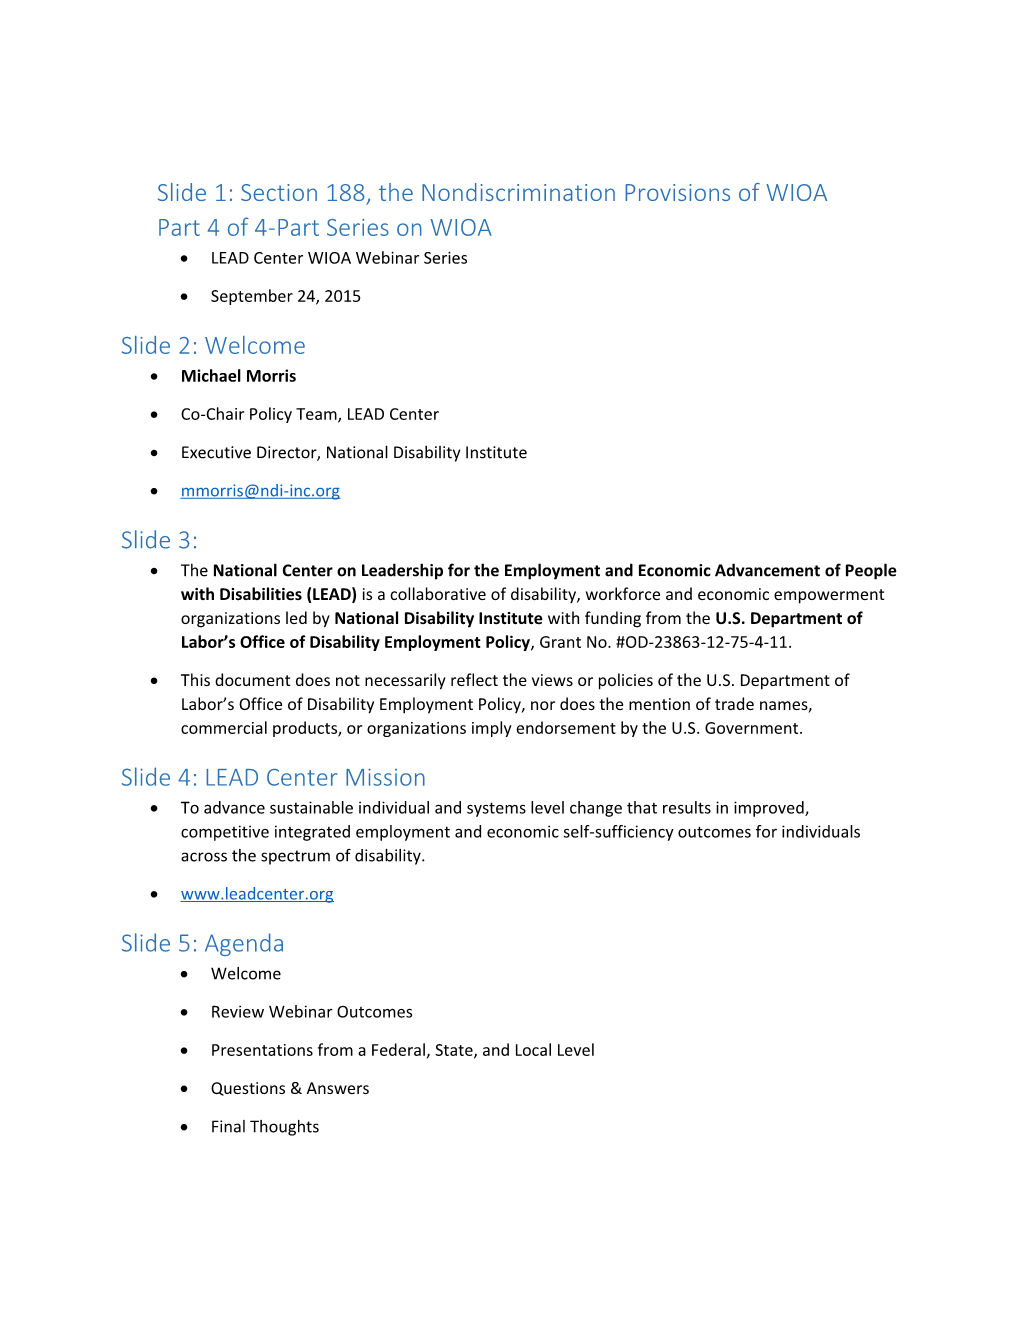 Slide 1: Section 188, the Nondiscrimination Provisions of Wioapart 4 of 4-Part Series on WIOA